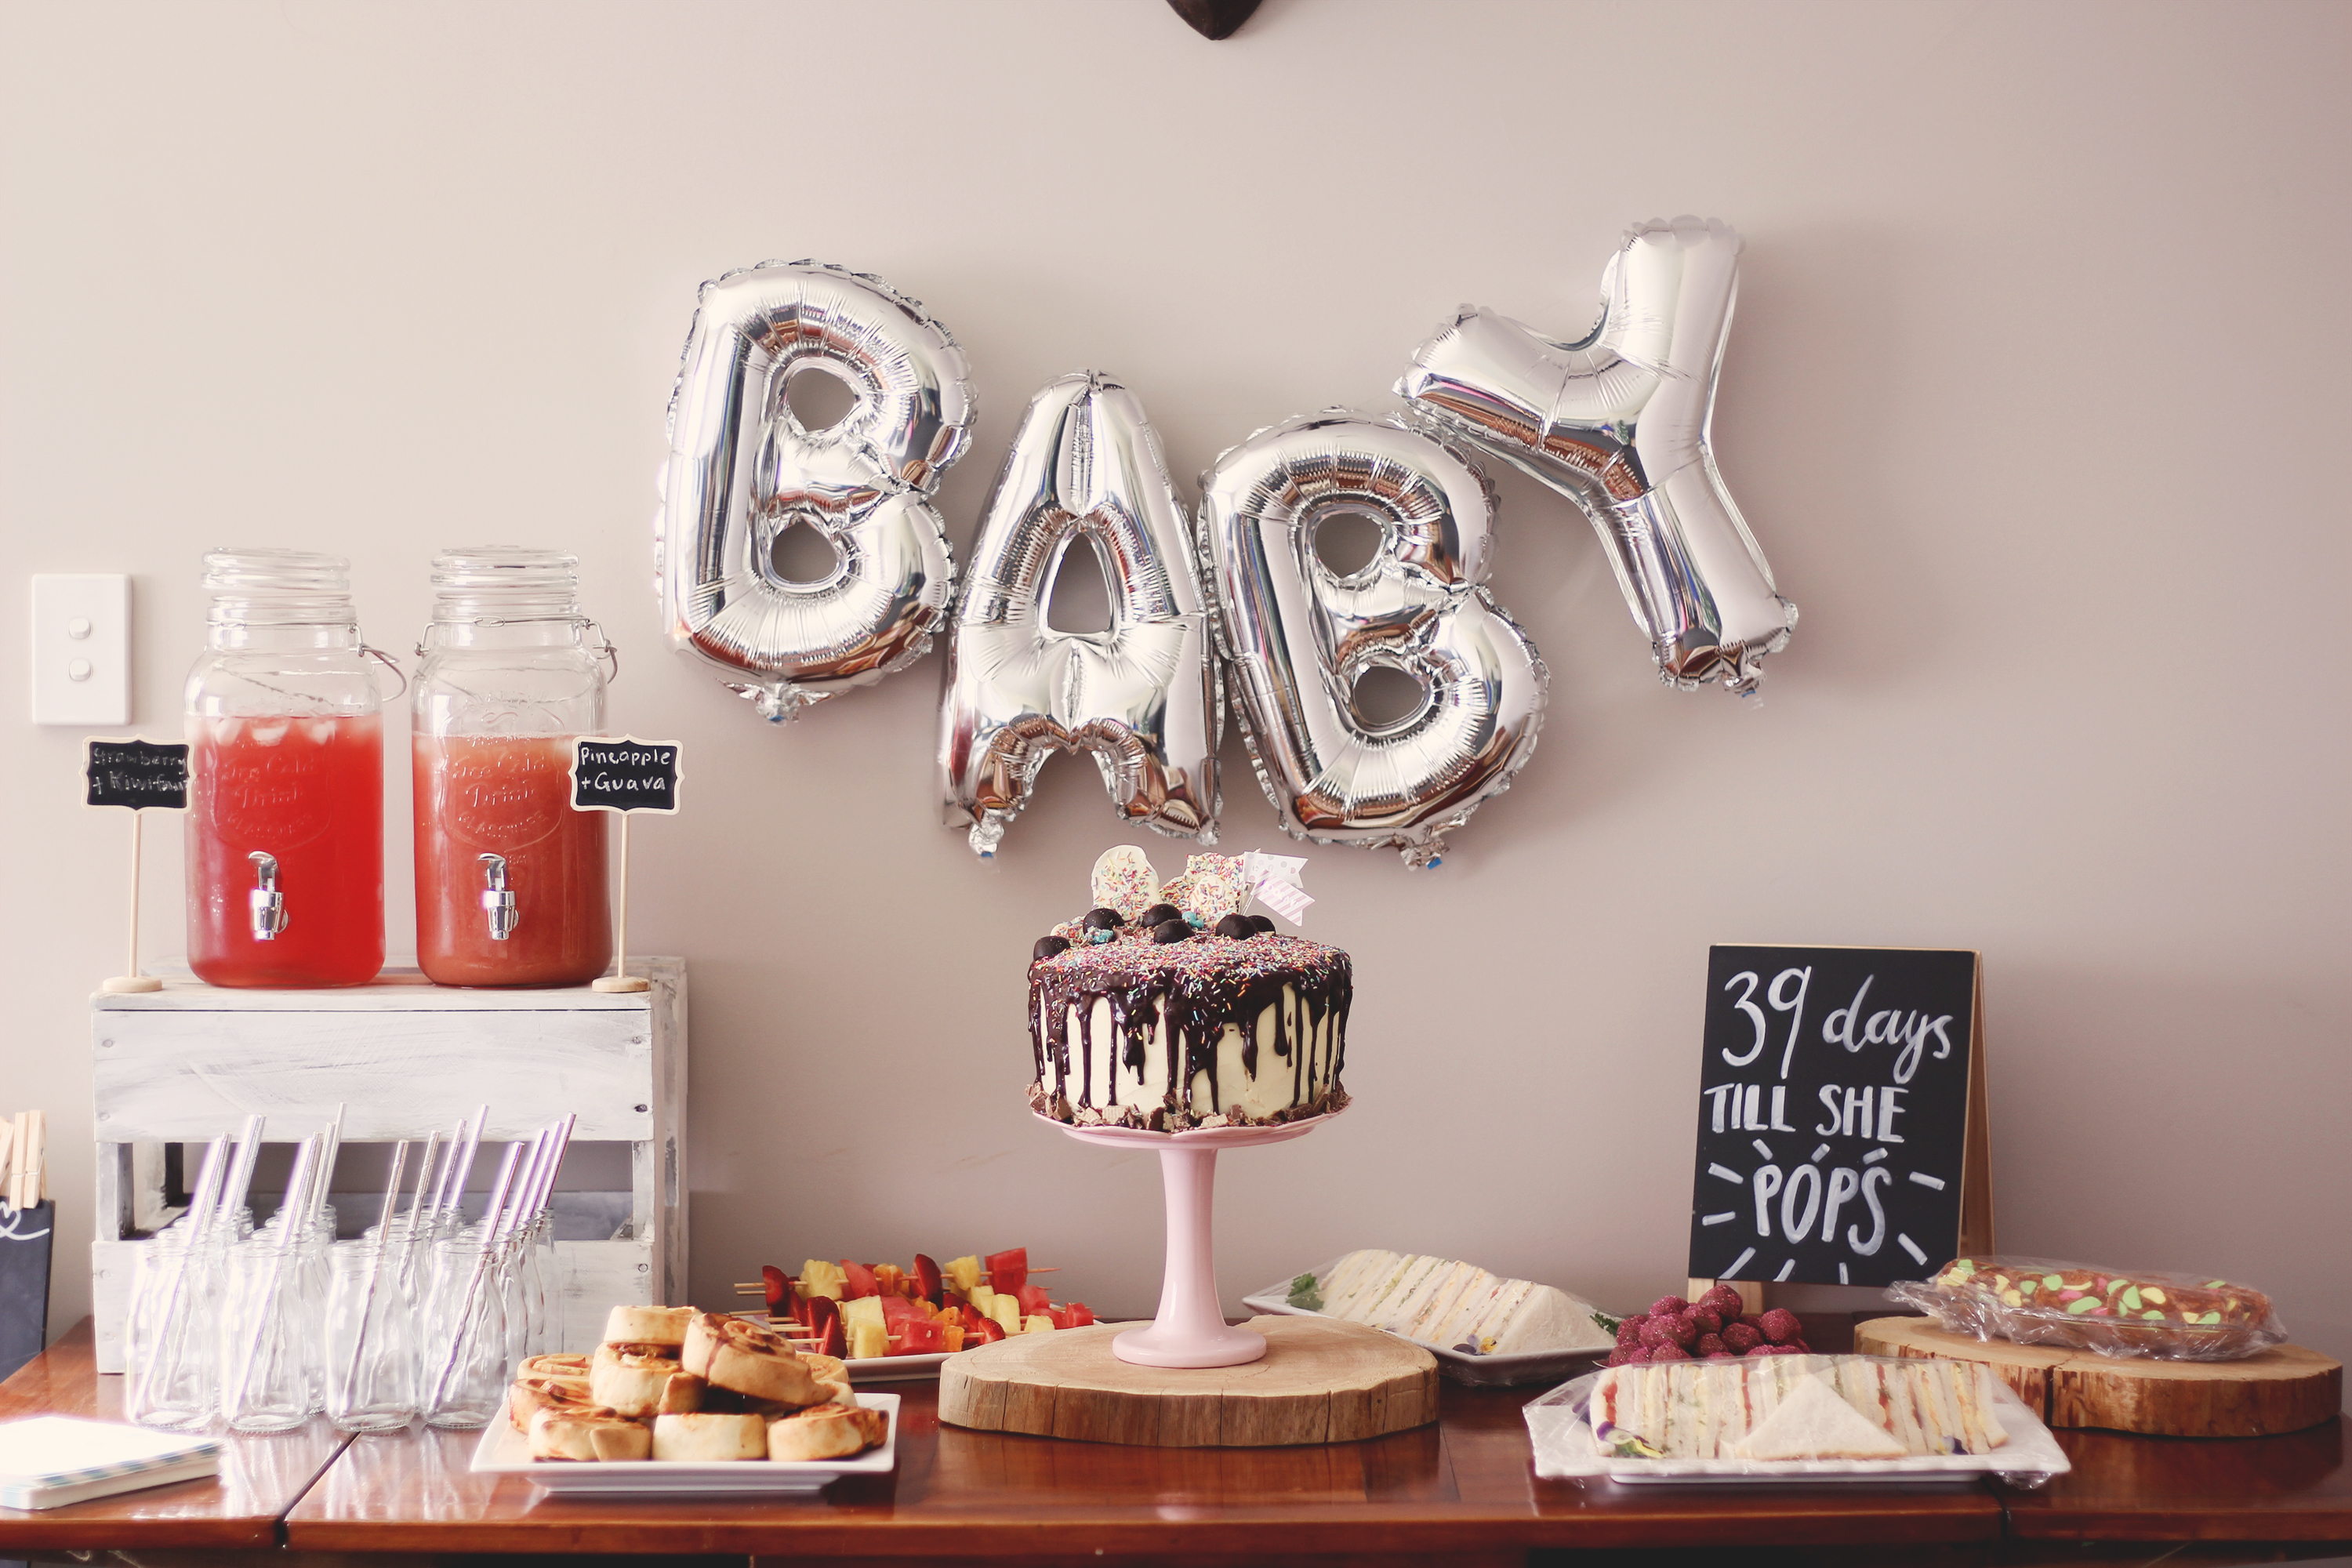 Check out this fun, boho baby shower. Foil balloons, wooden rounds and a cake to die for. plus free printable baby shower games.